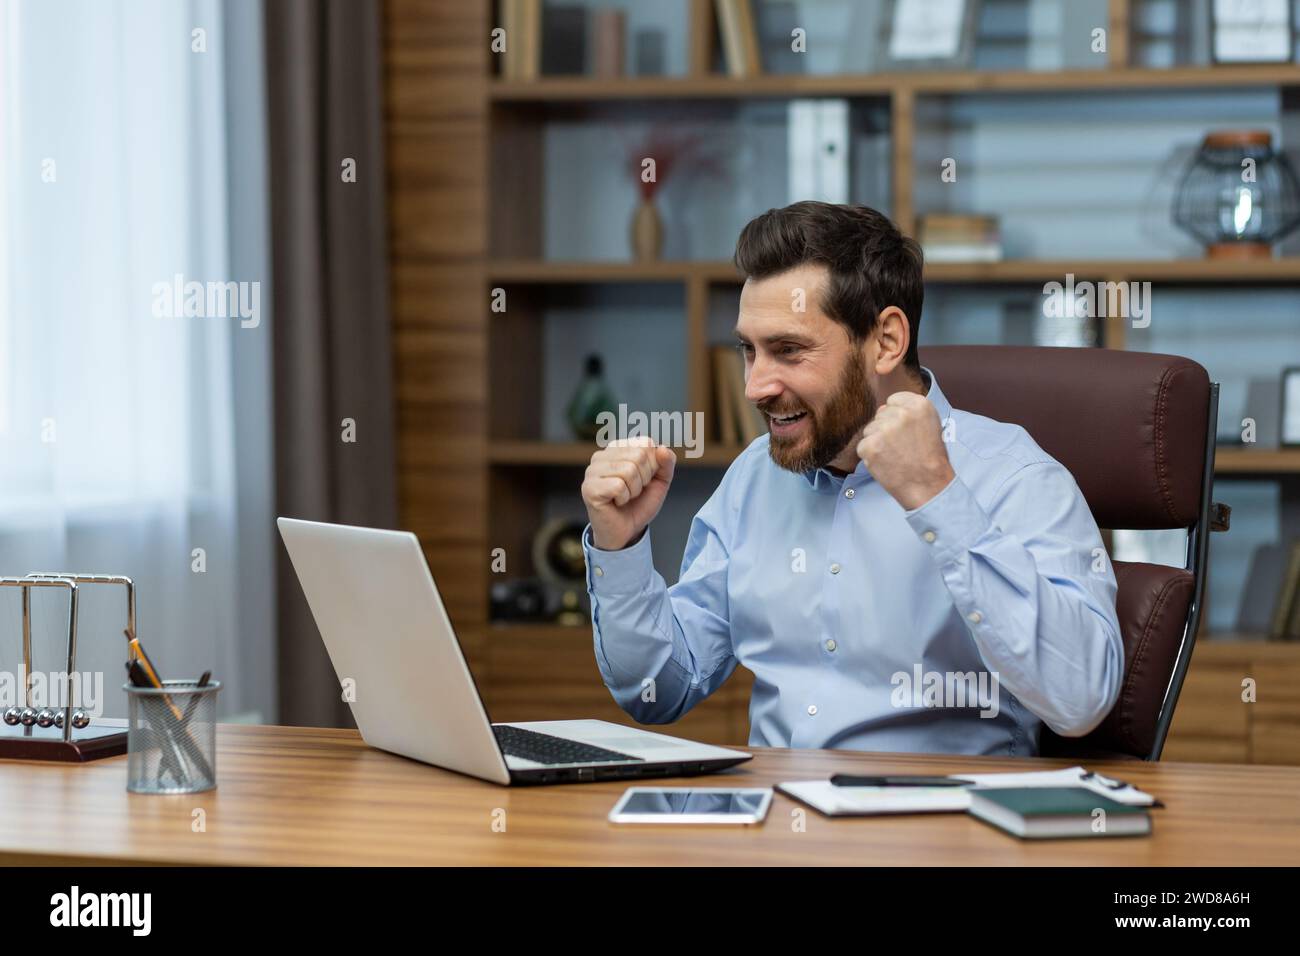 Exuberant mature businessman with a beard showing excitement and success at his home office desk, laptop screen visible. Stock Photo